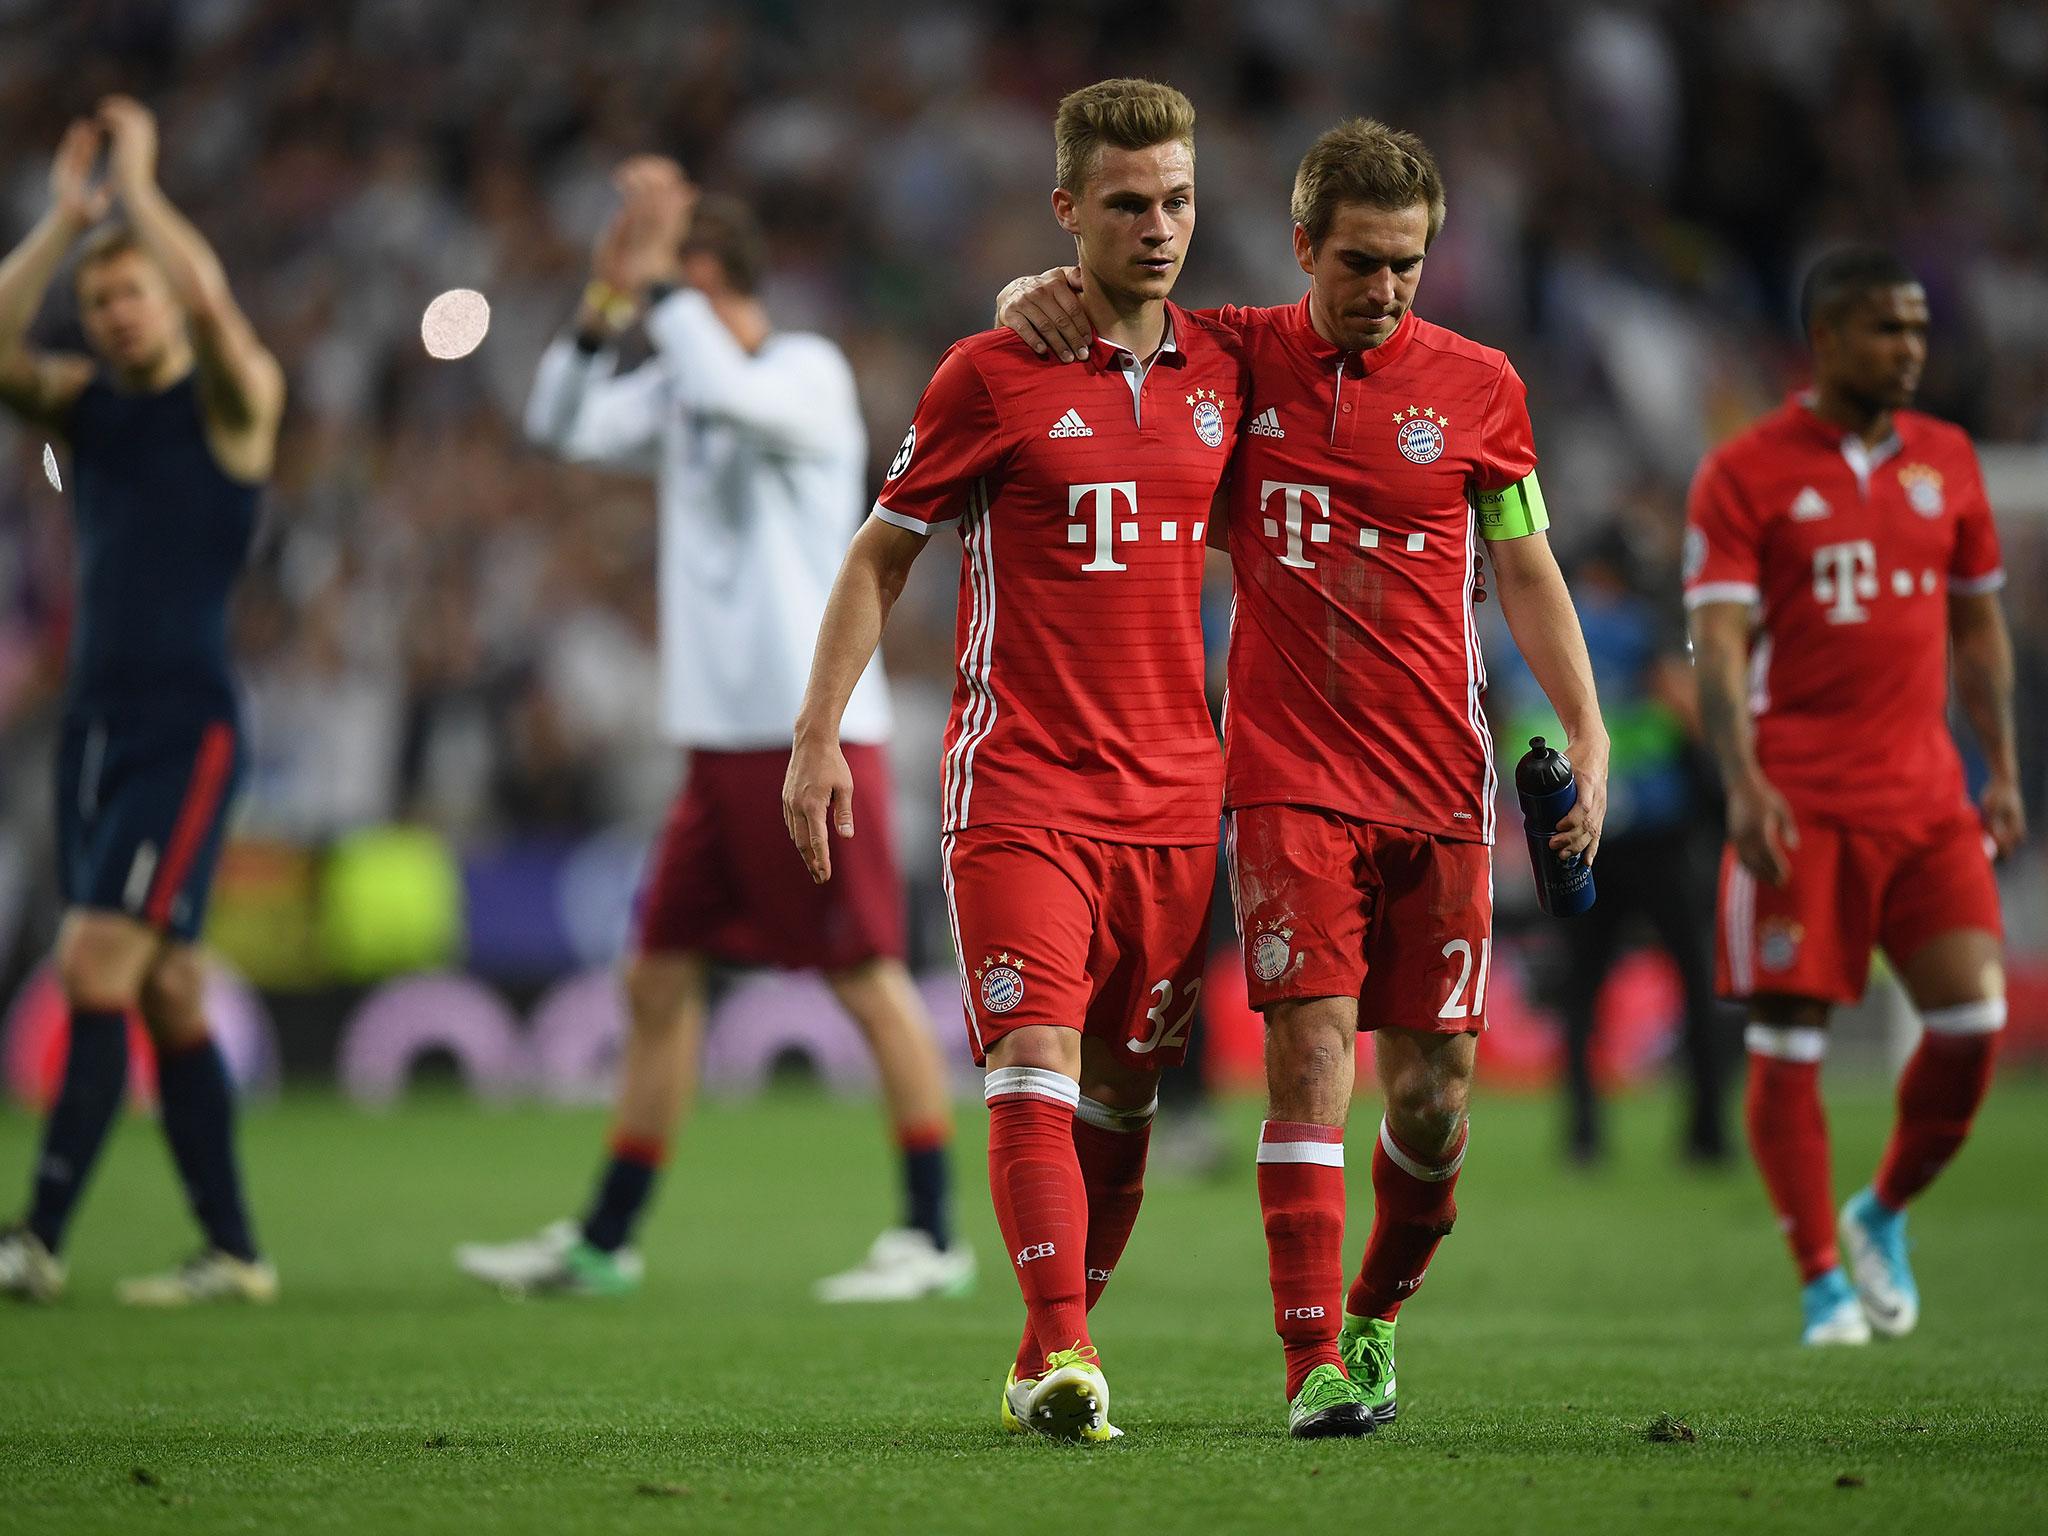 Philipp Lahm played his last Champions League match for the side on Tuesday